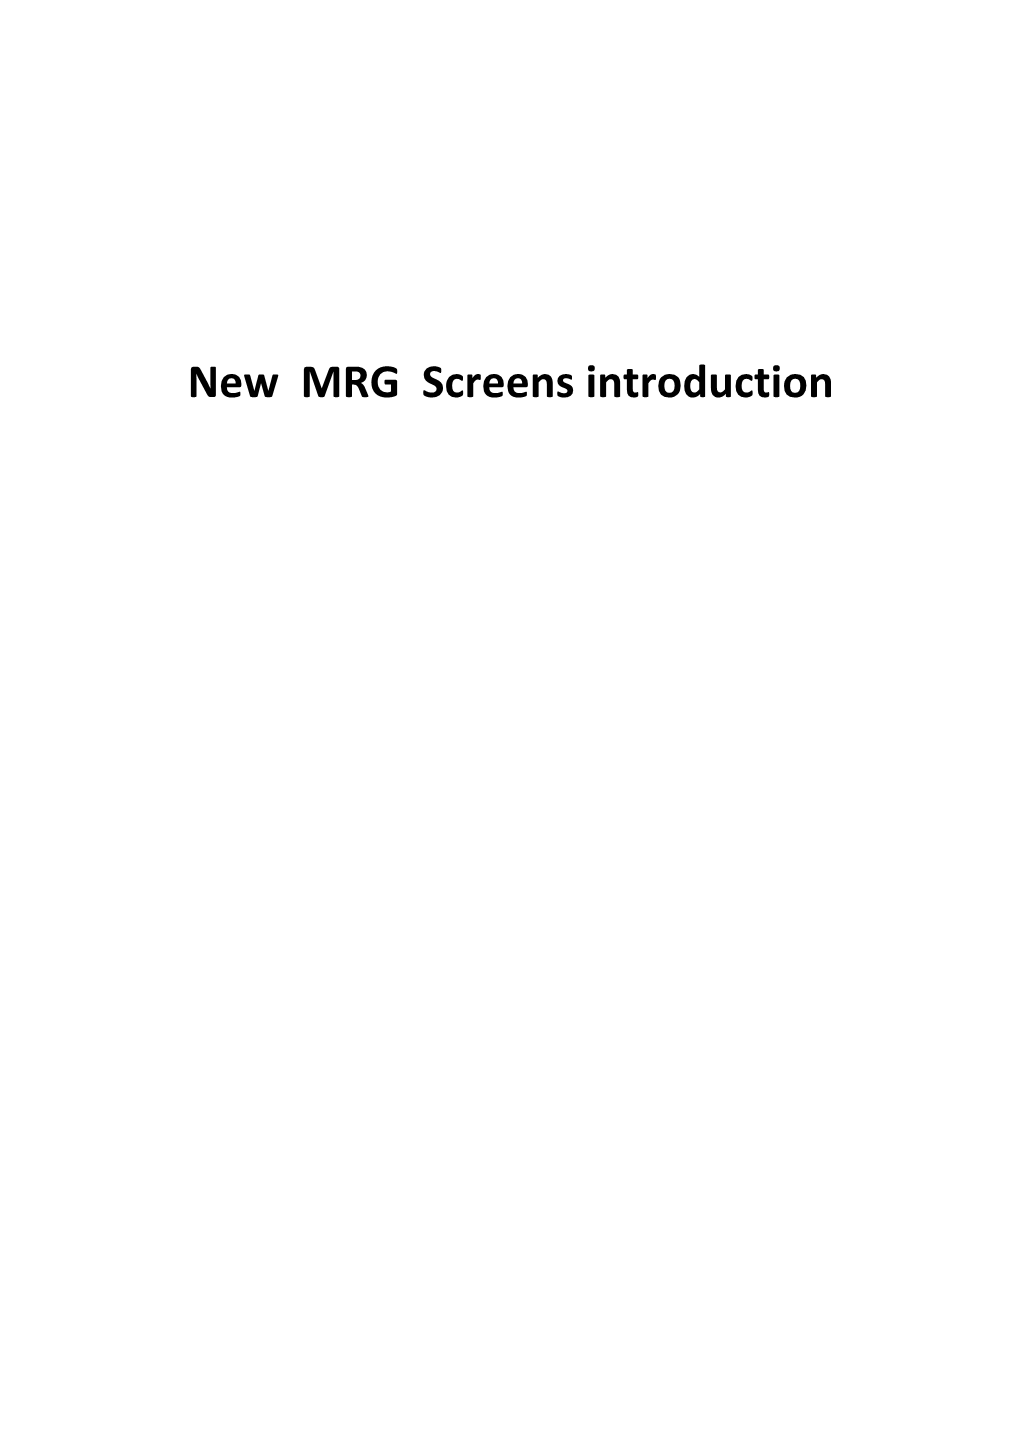 New MRG Screens Introduction